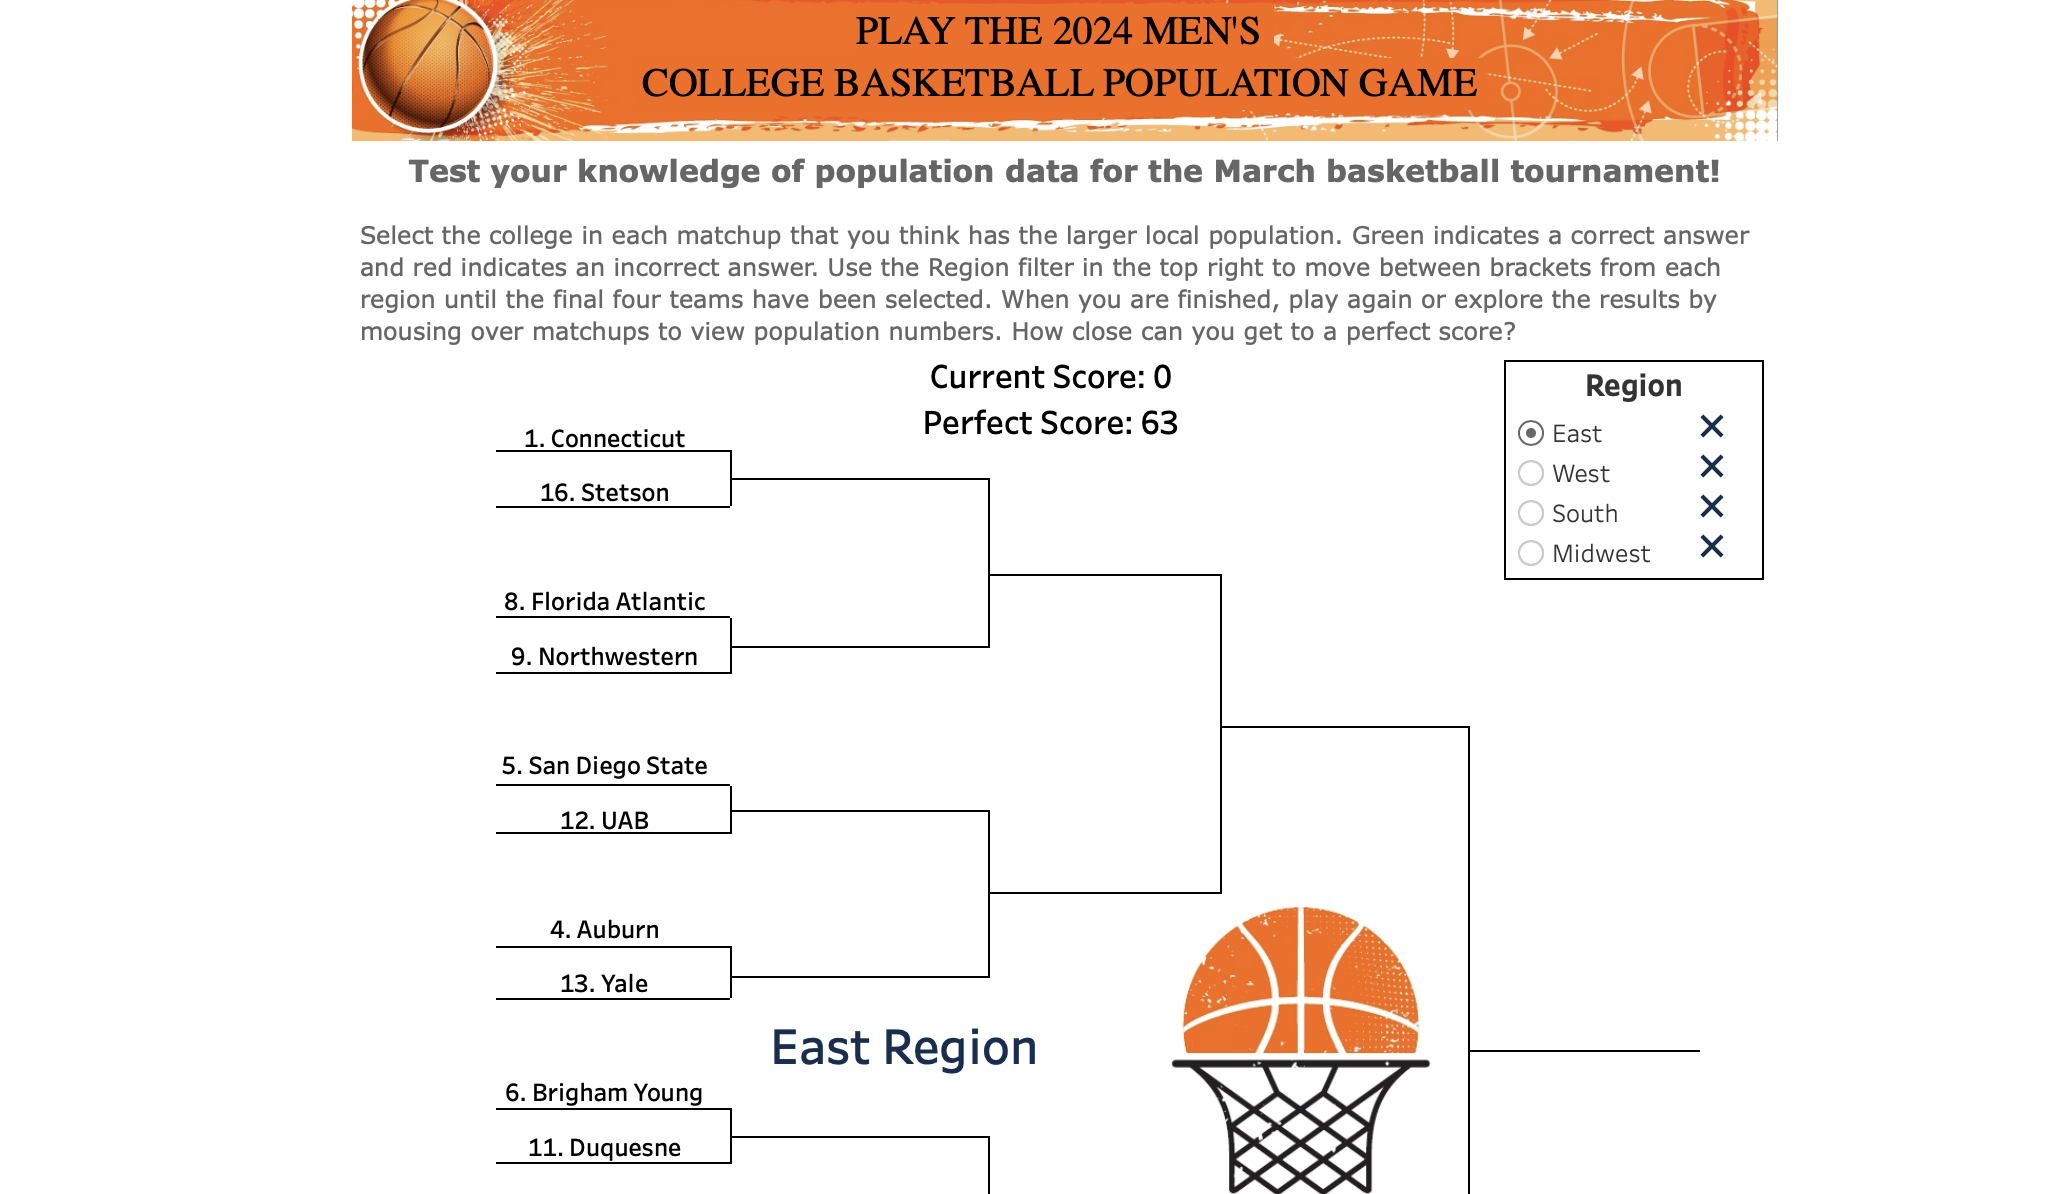 Going Mad this March? Play the College Basketball Population Game